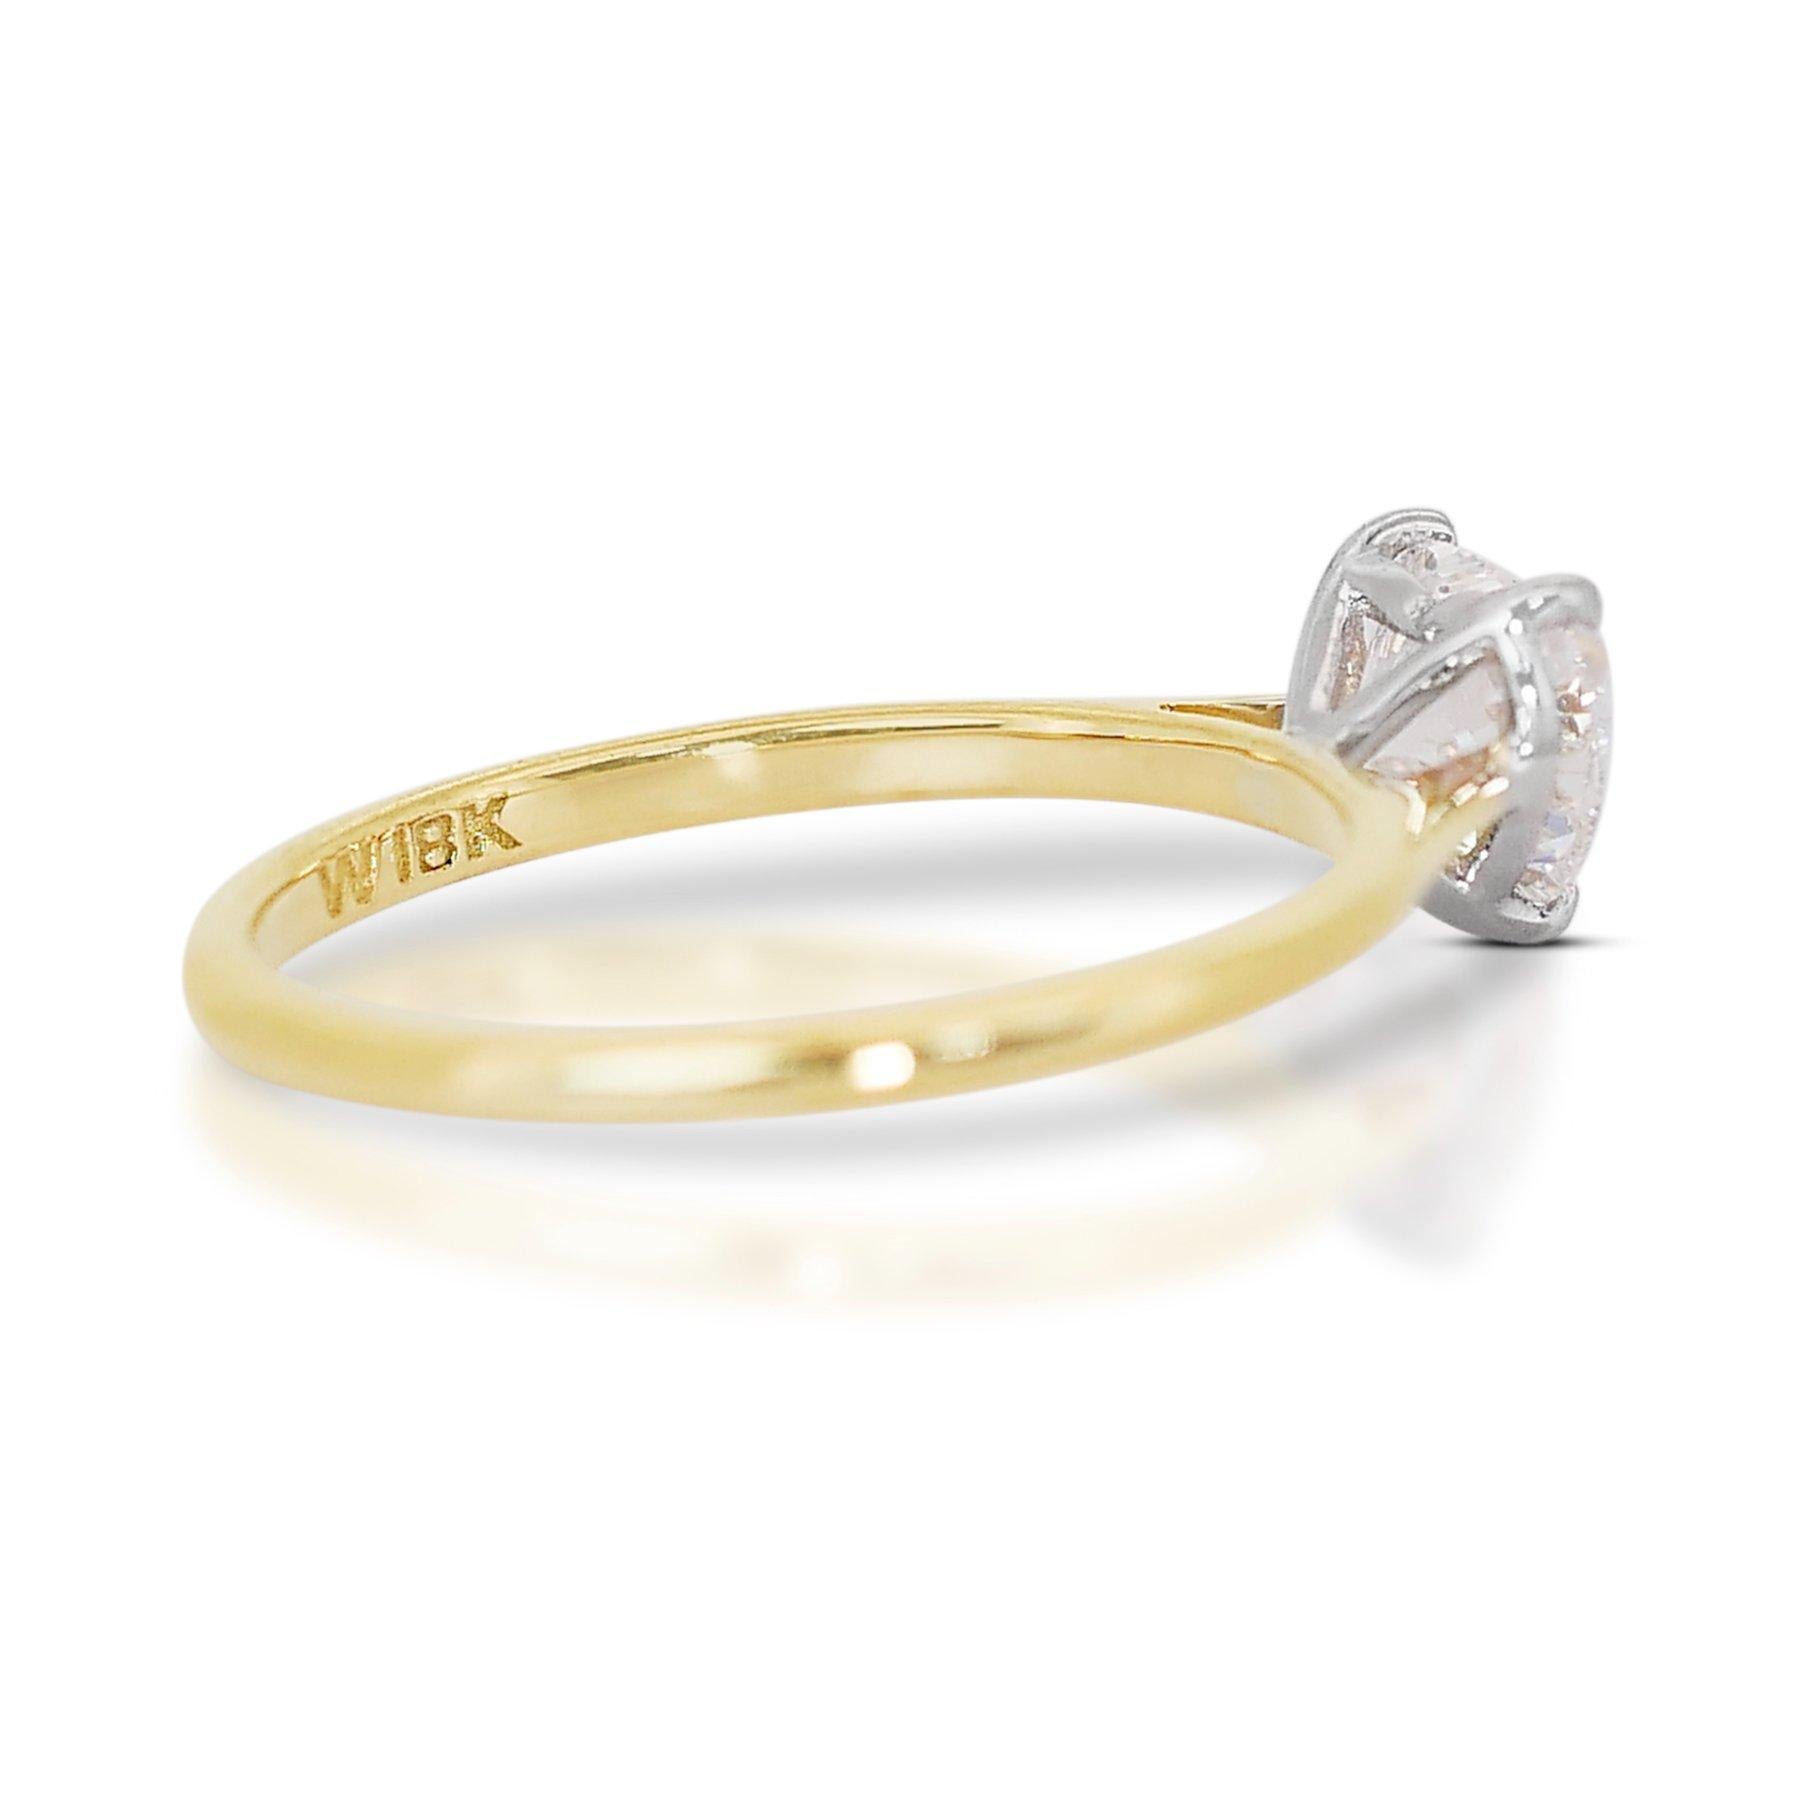 Charming 0.75 ct Heart-Shaped Diamond Solitaire Ring in 18k Yellow Gold – GIA  2